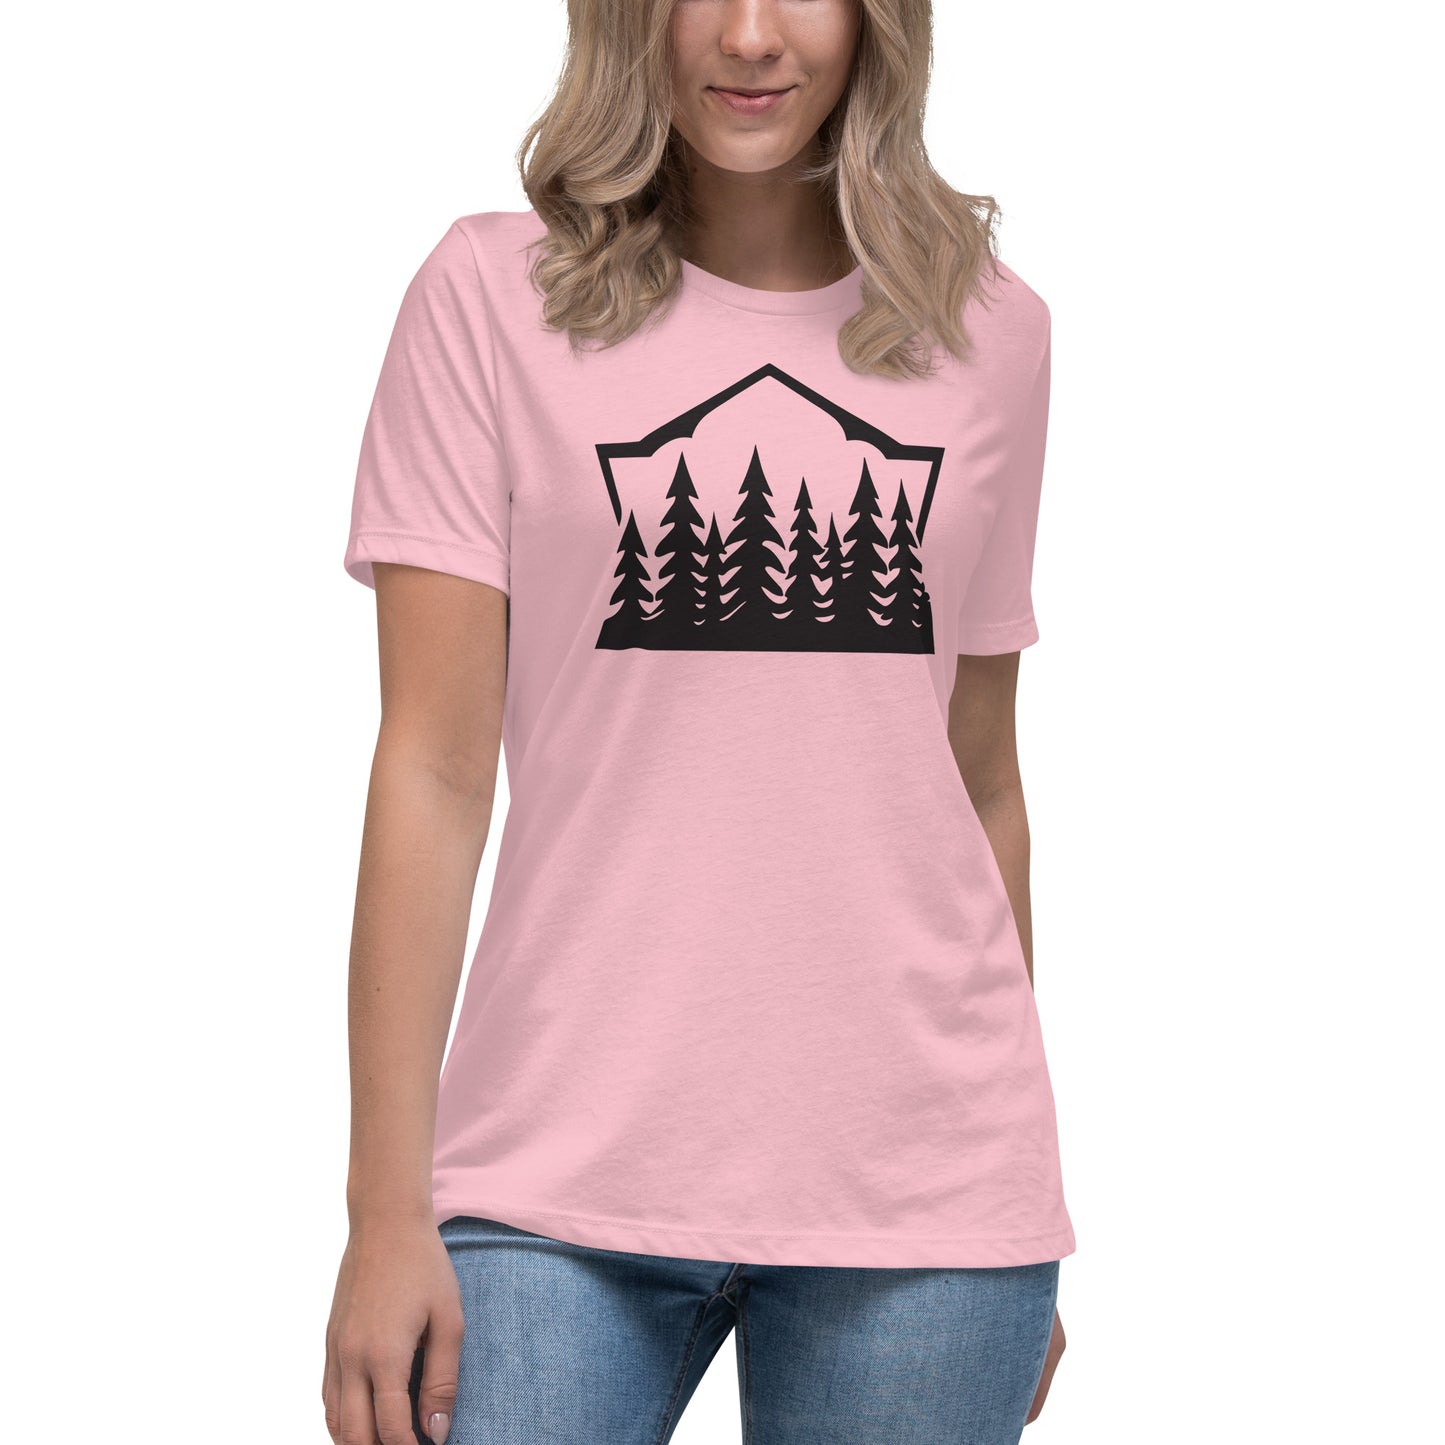 Into the Forest Women's Relaxed T-Shirt